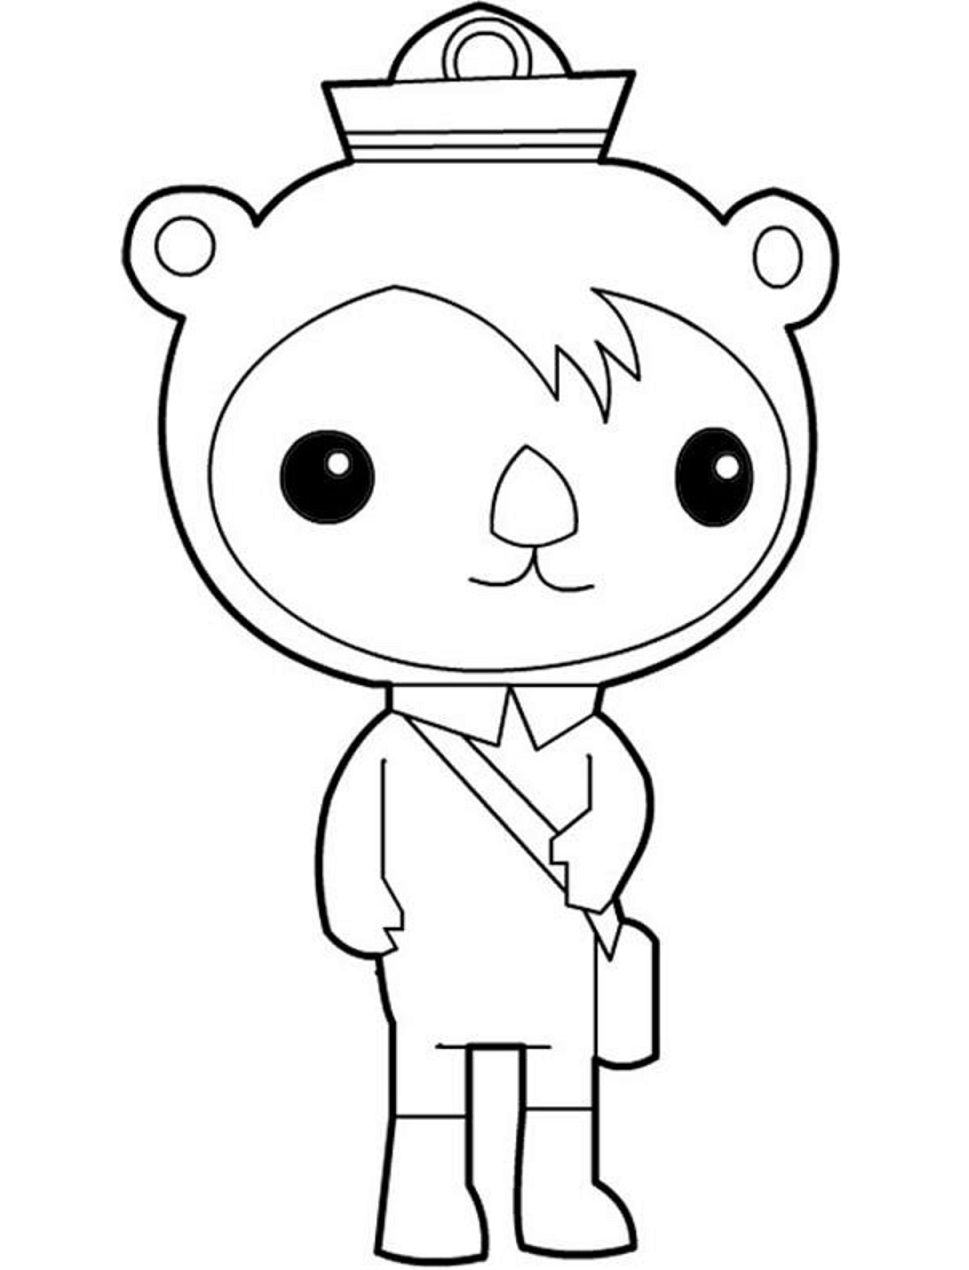 Octonauts Coloring Pages - Free Printable Coloring Pages for Kids